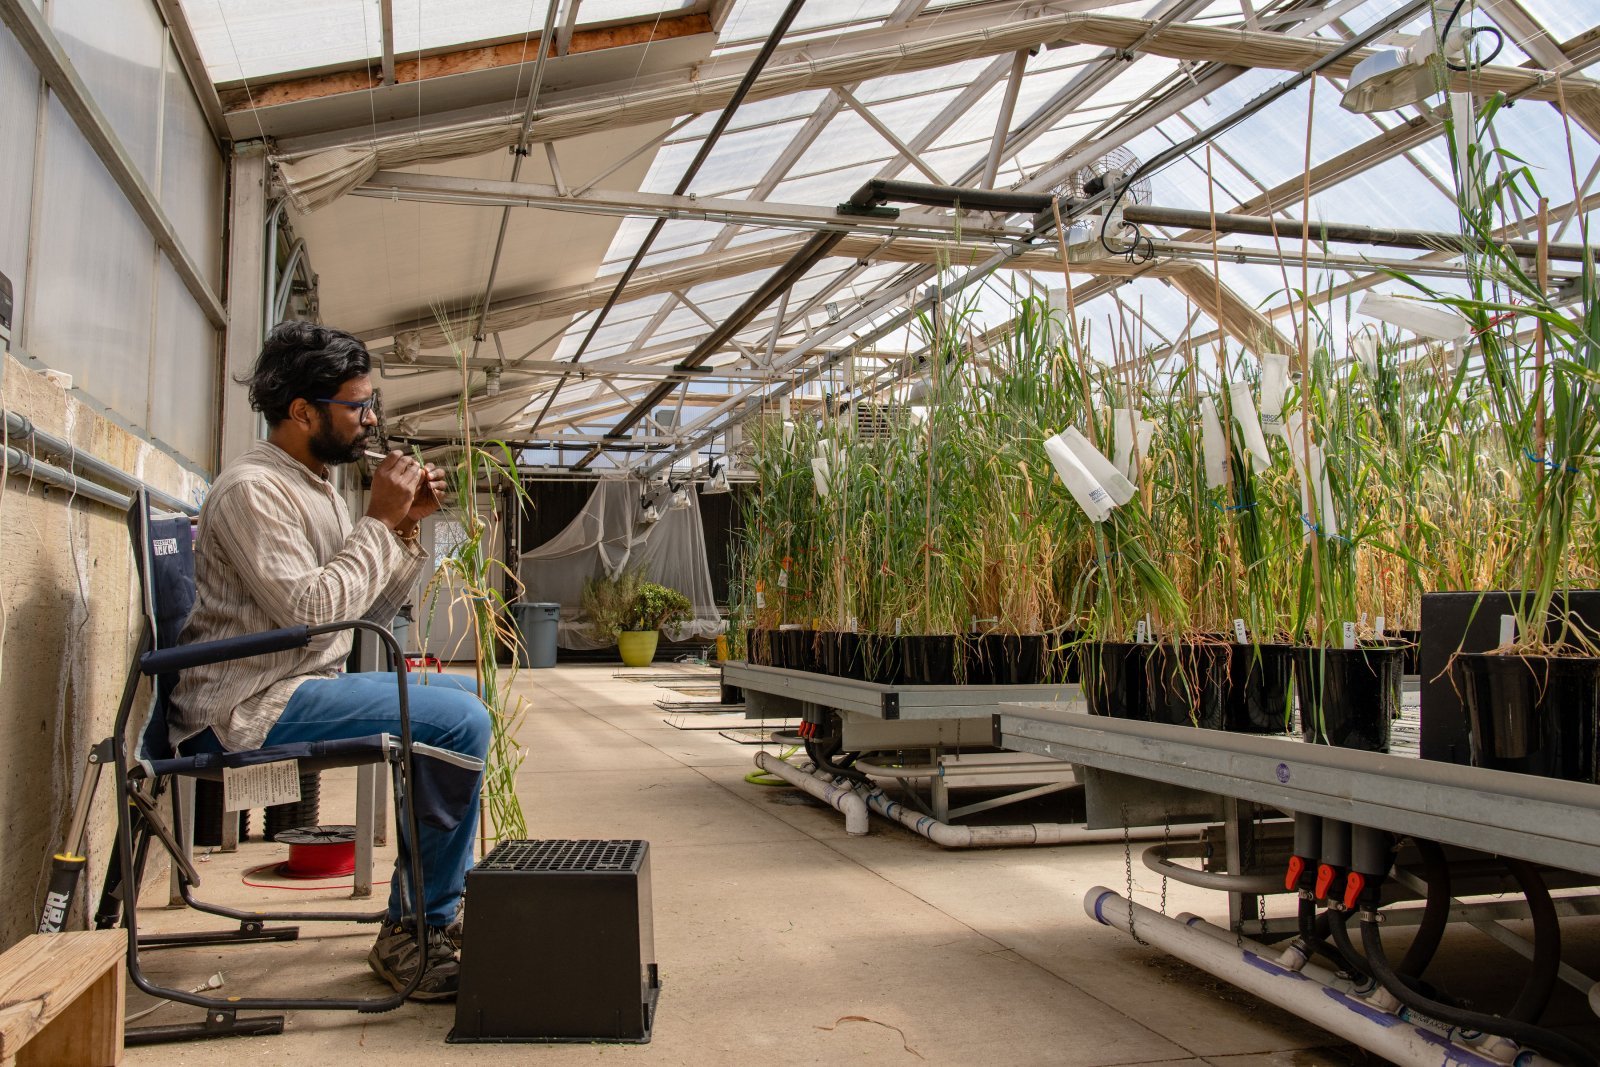 Land Institute researcher Piyush Labehsetwar studies a wheat plant in one of the organization's greenhouses in March 2019.